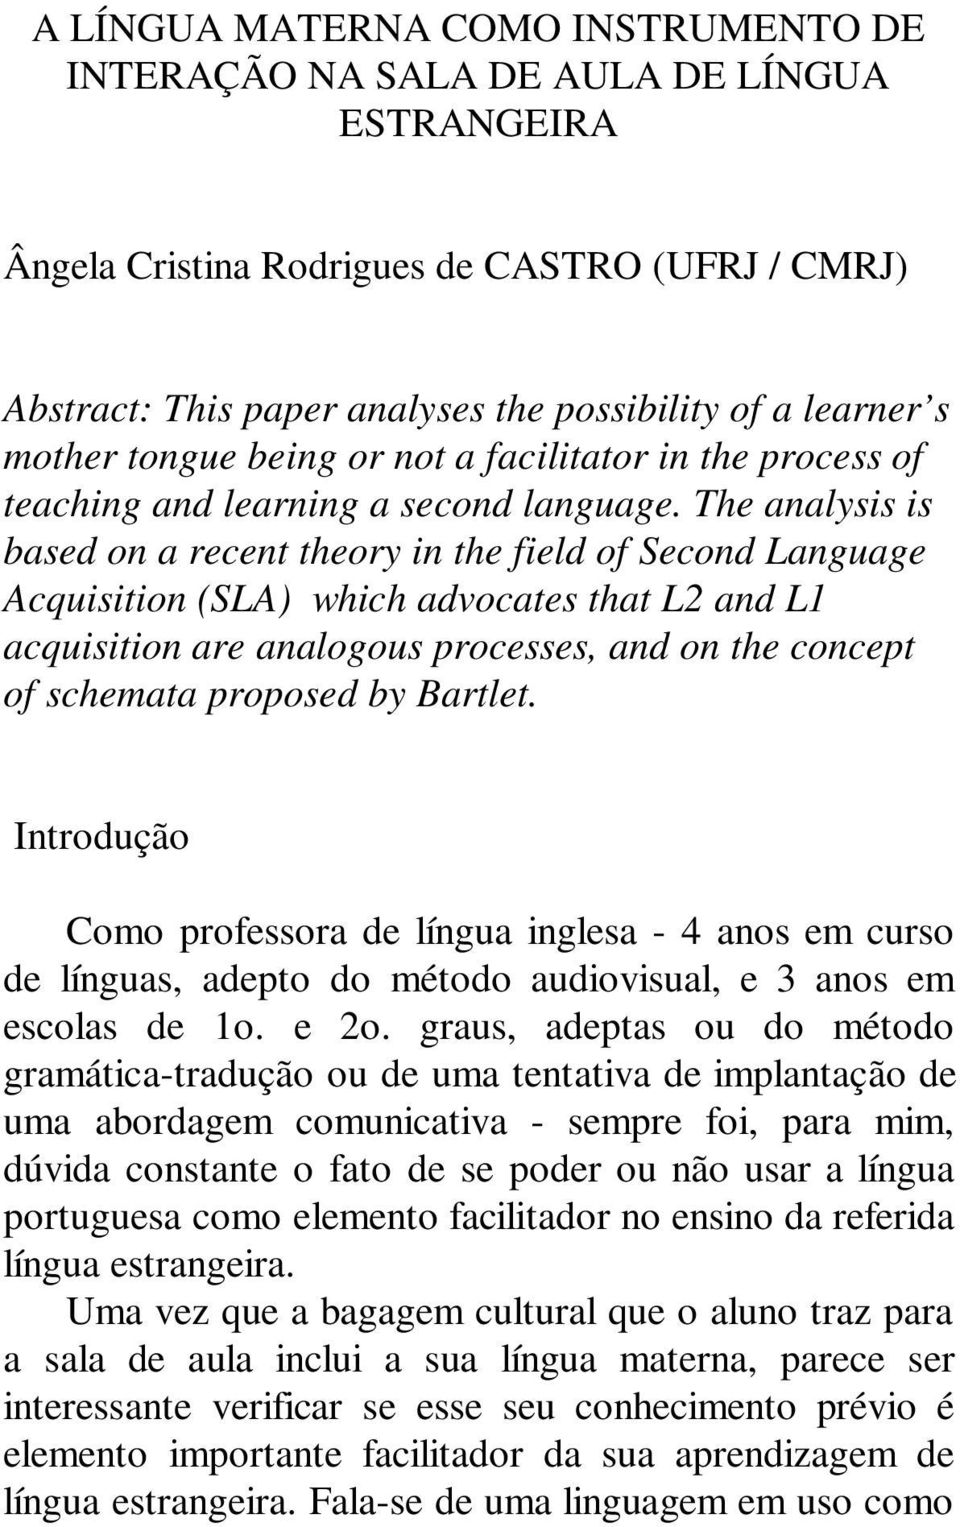 The analysis is based on a recent theory in the field of Second Language Acquisition (SLA) which advocates that L2 and L1 acquisition are analogous processes, and on the concept of schemata proposed